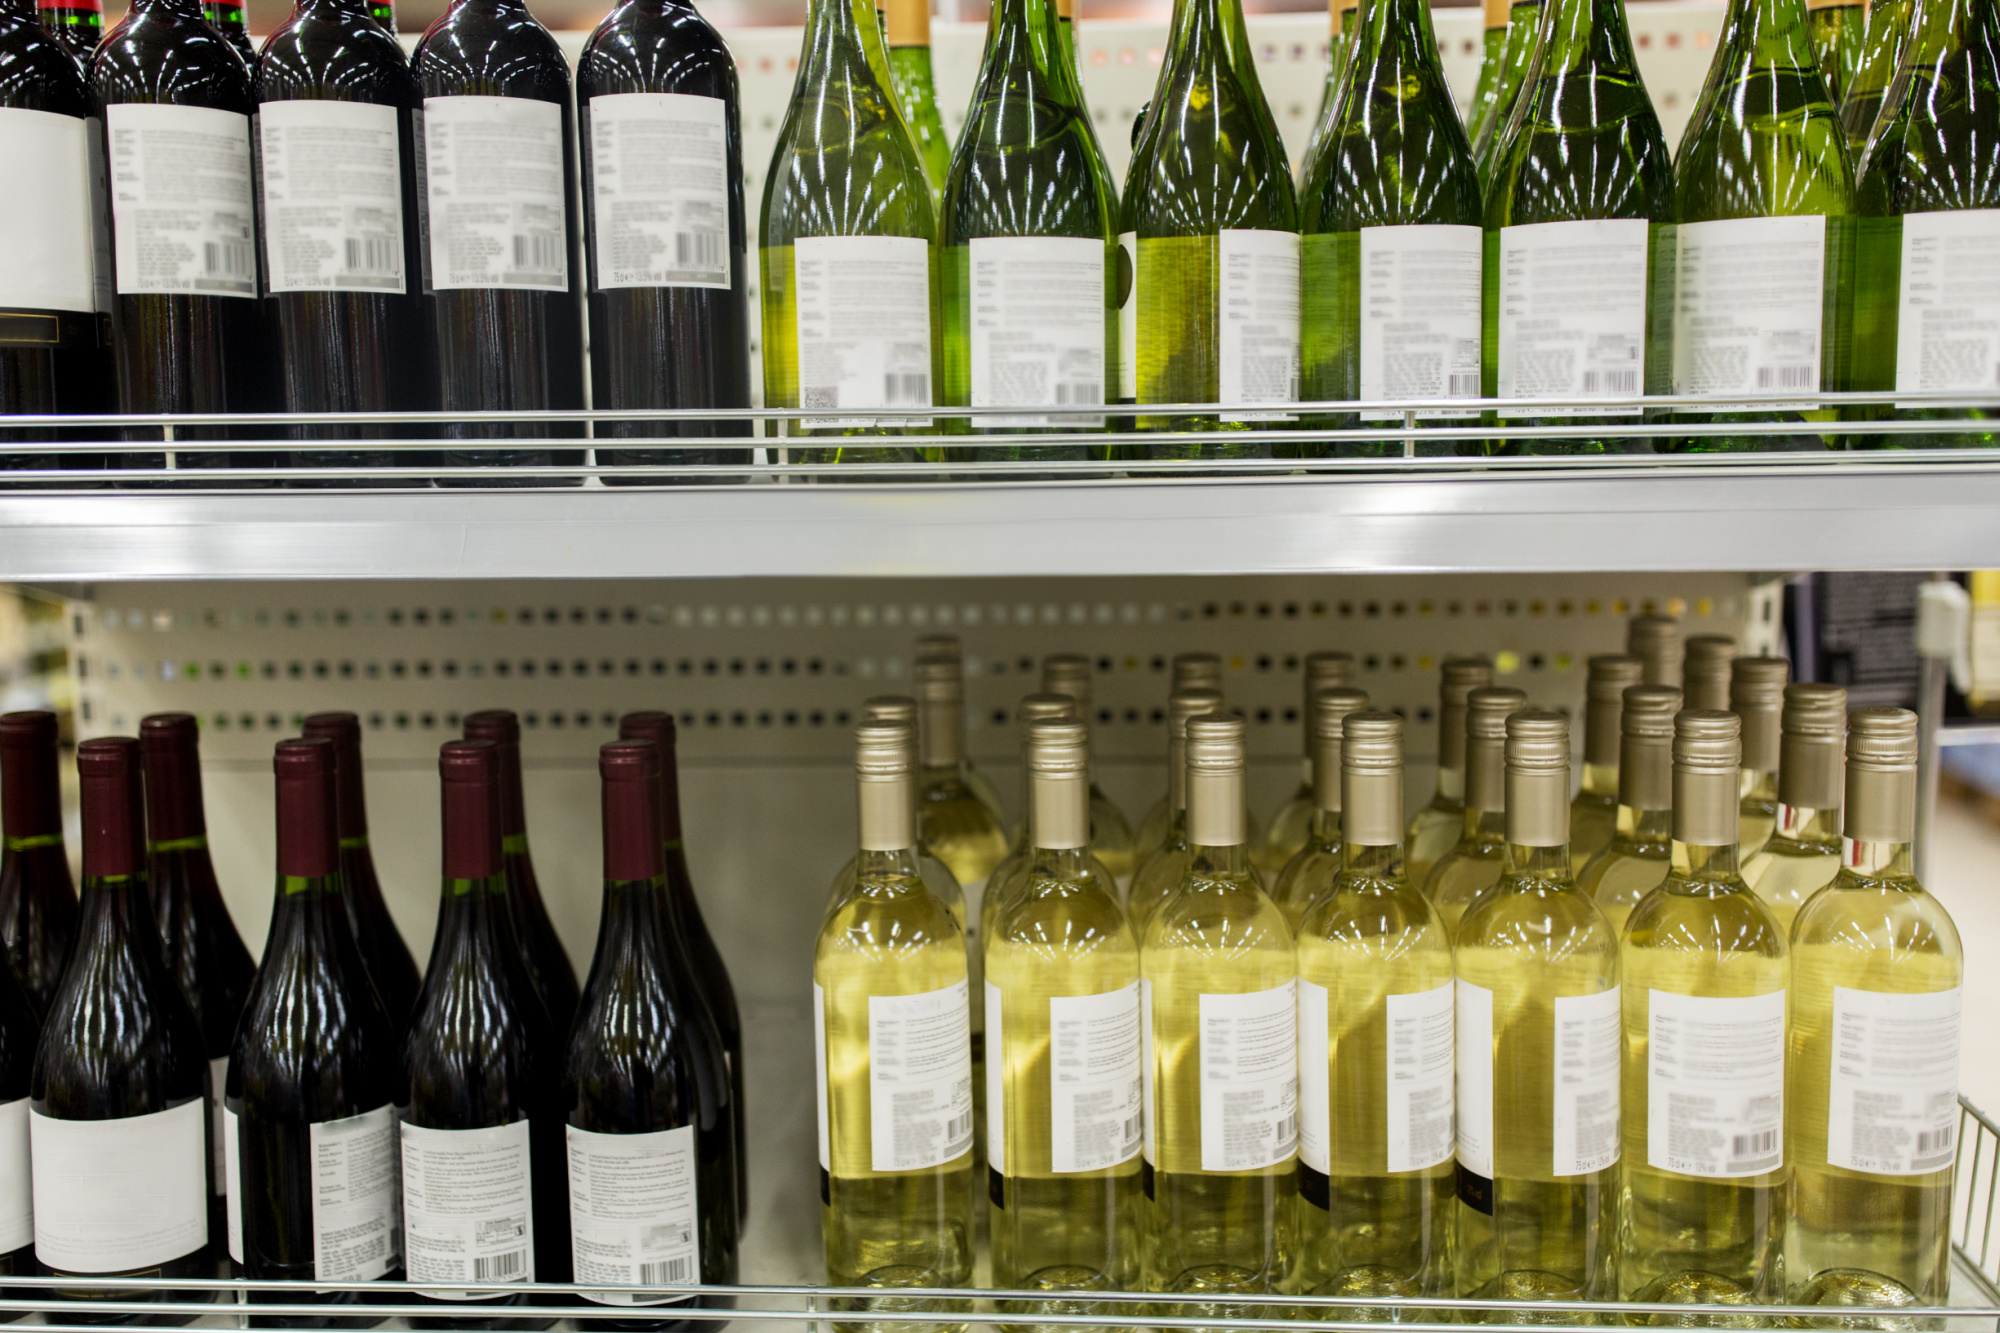 Bottles of wine on a shelf in a store. Does alcohol expire?